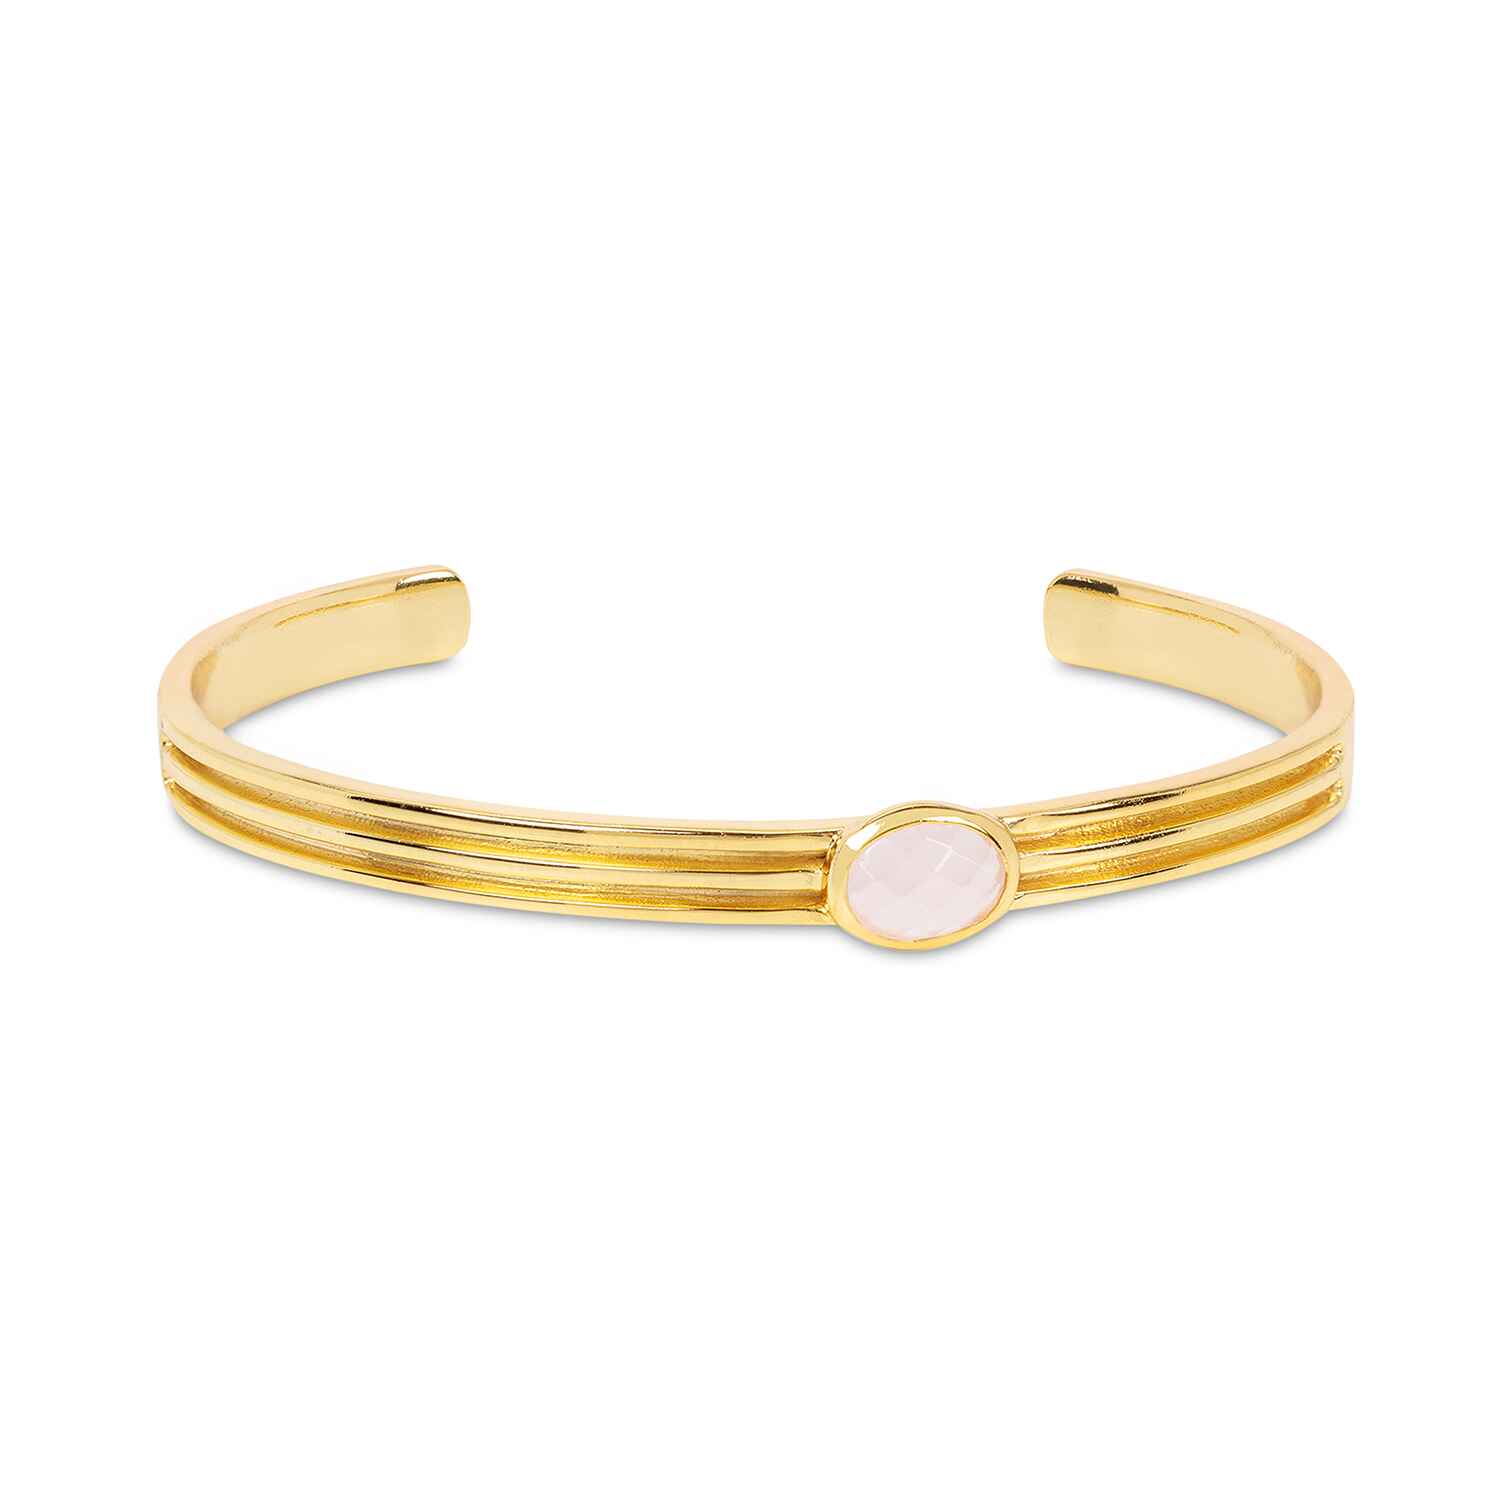 Handmade with sustainably sourced materials, the Athena Gold Cuff Bracelet With Rose Quartz is a sleek and lustrous bangle featuring an oval rose quartz gemstone. The perfect base layer for your daily wrist stack.